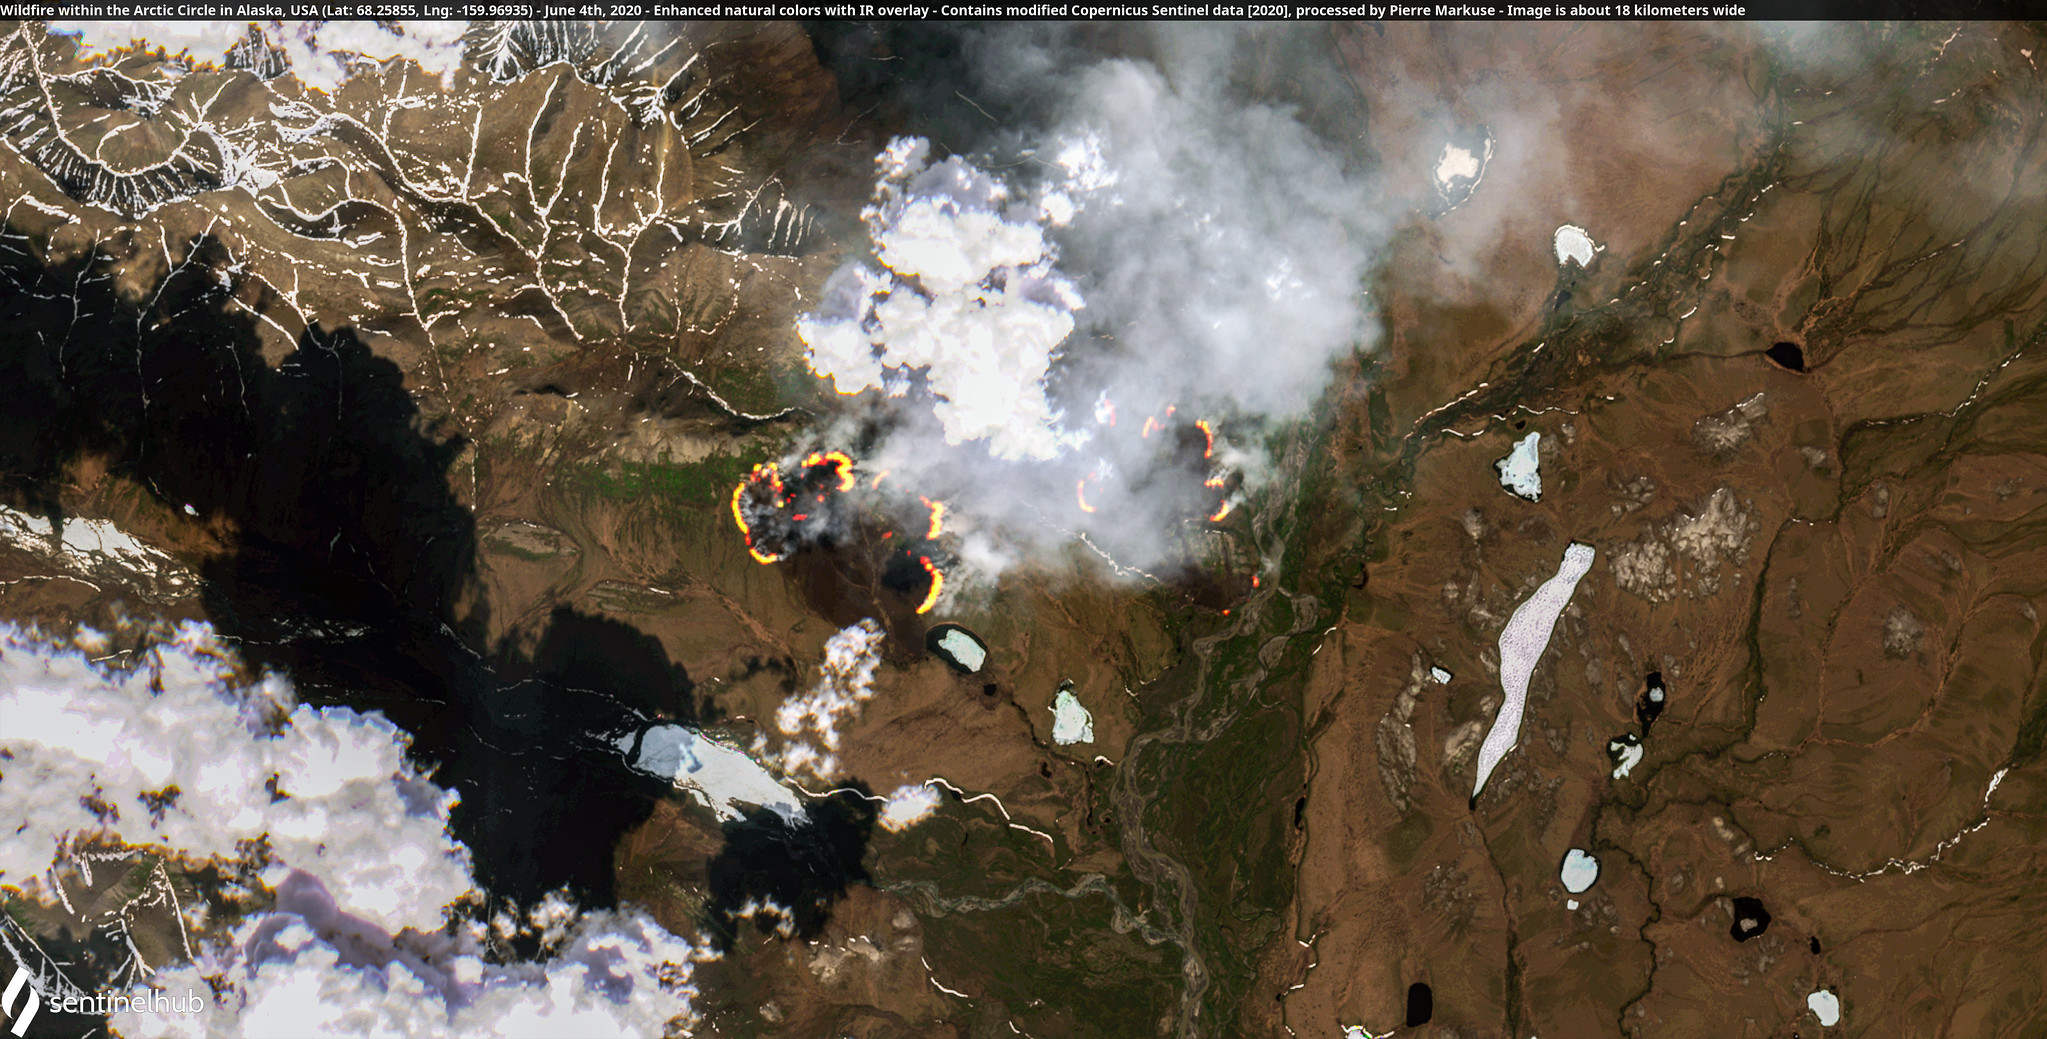 Wildfire within the Arctic Circle in Alaska on June 4th, 2020. (Image: Pierre Markuse, Flickr)